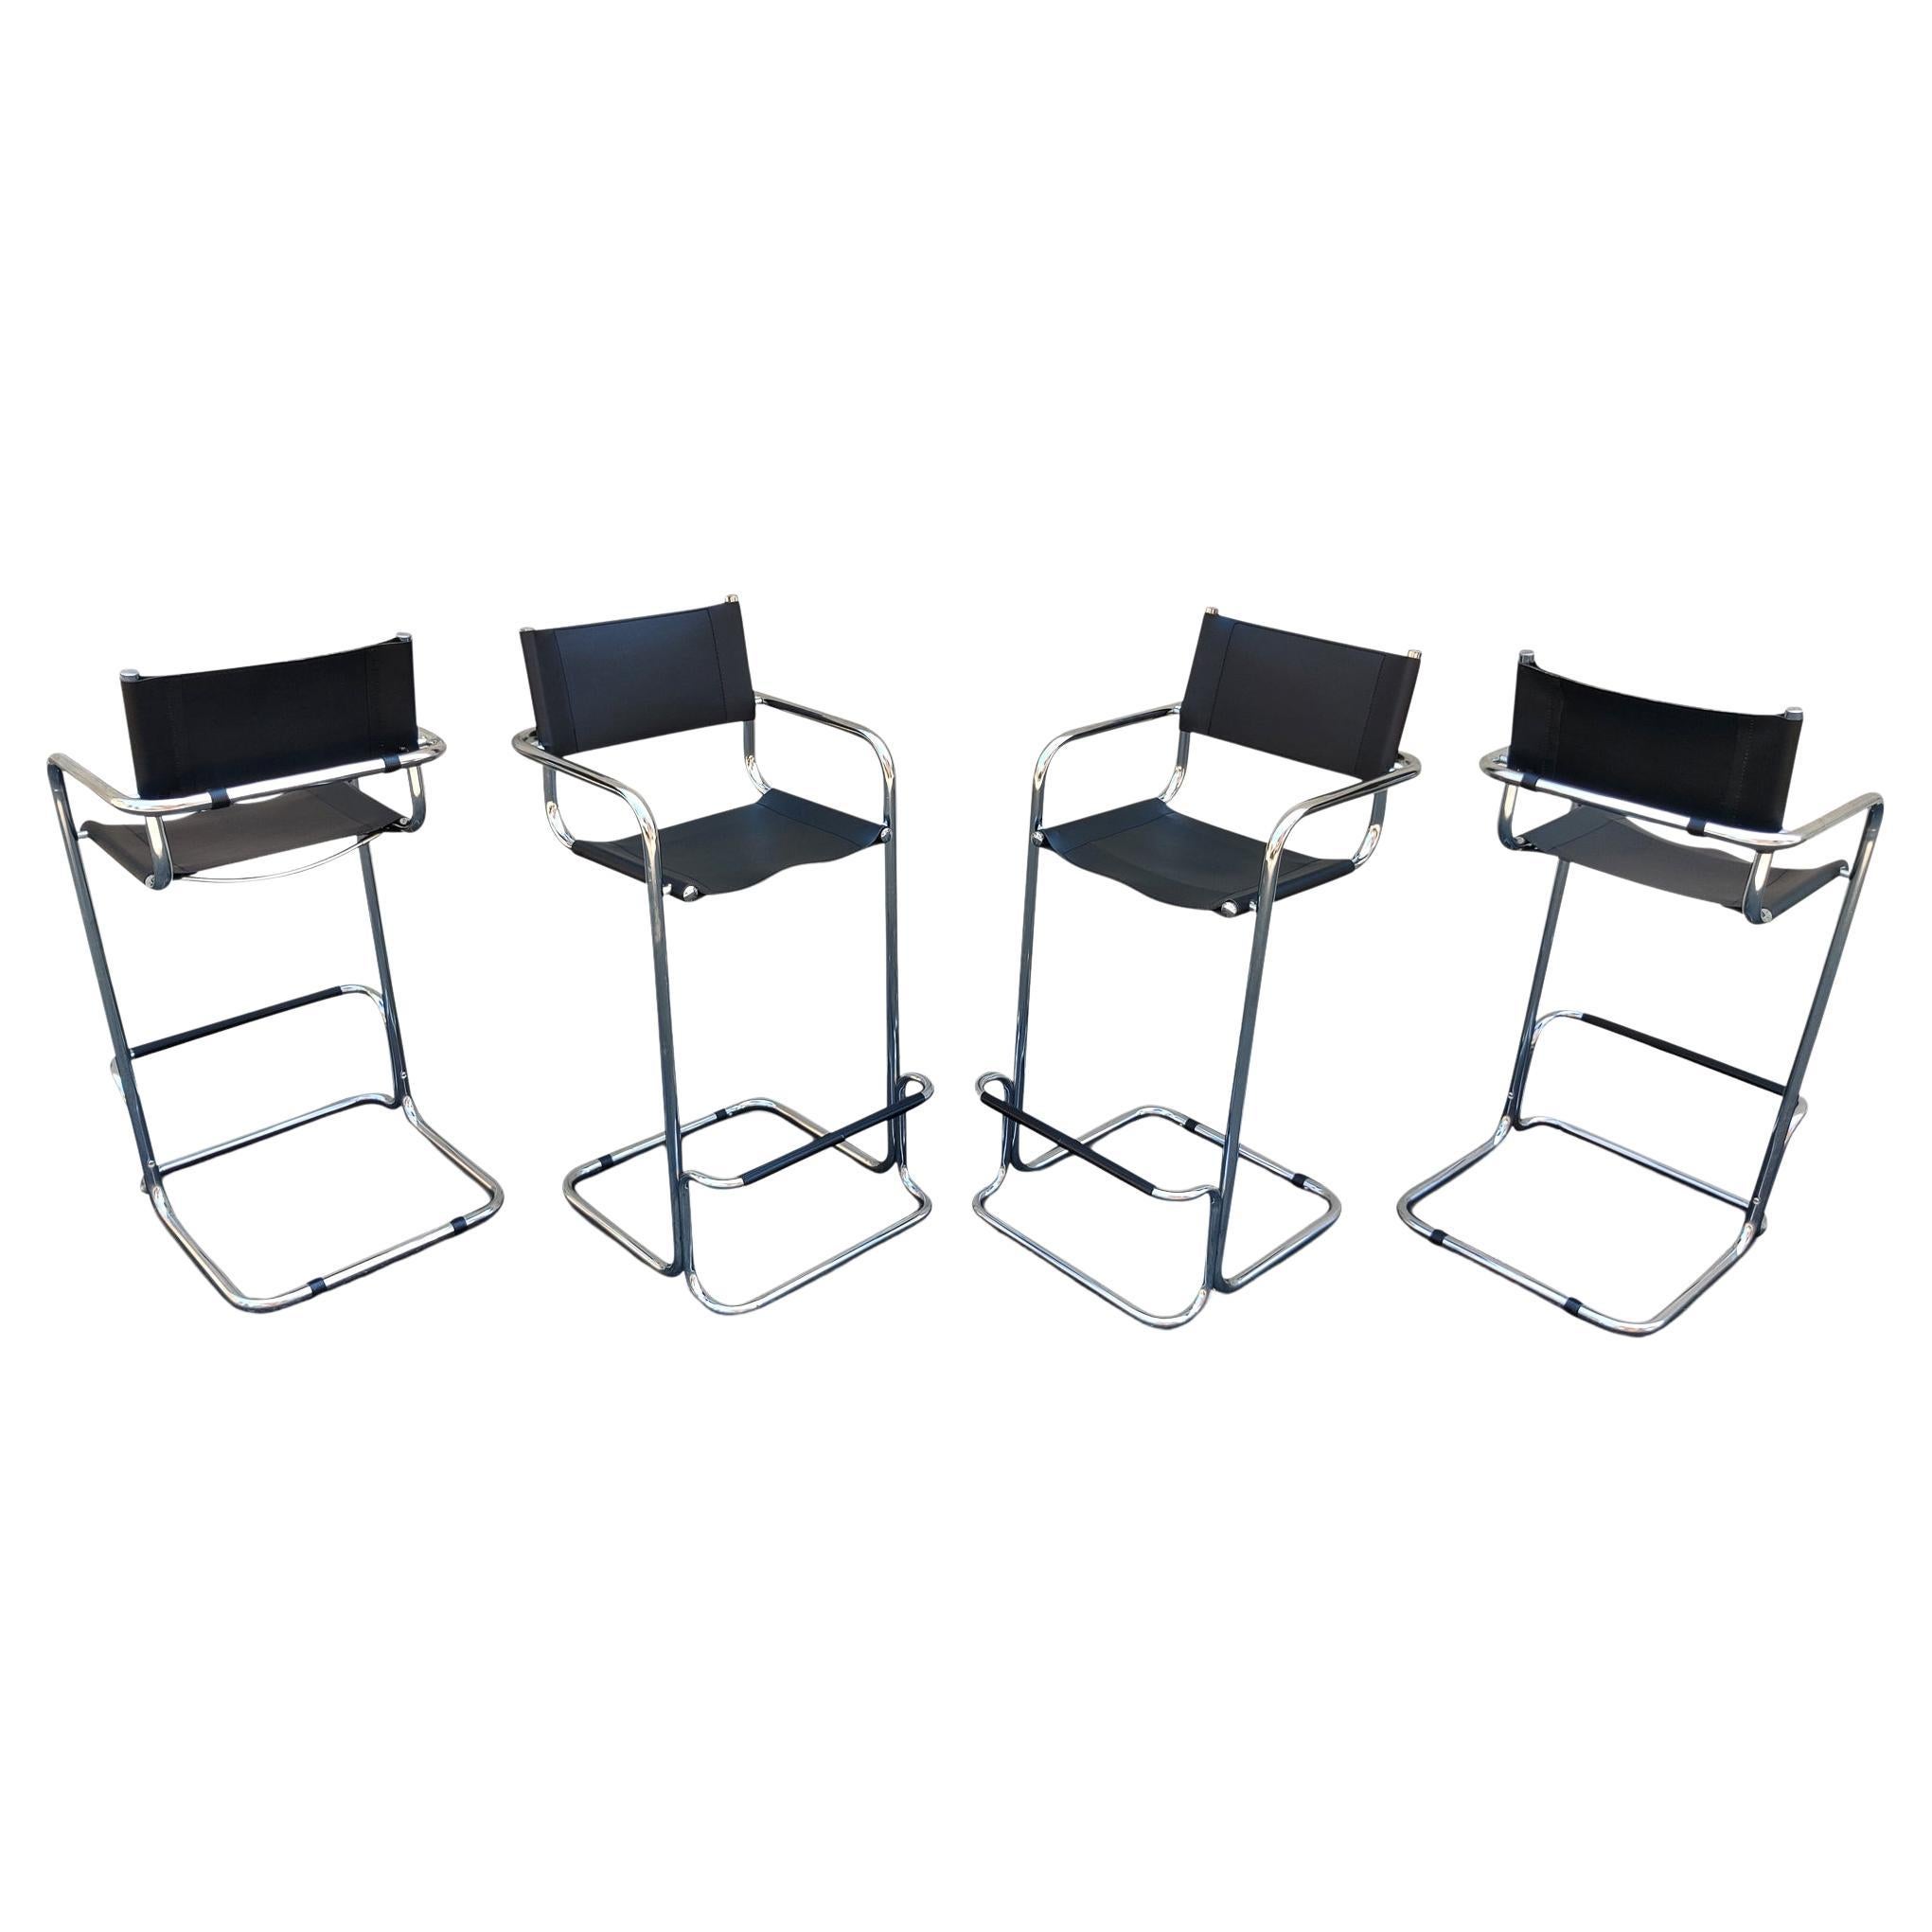 This is a great looking and very comfortable set of four (4) high-chairs or bar-stools inspired by the Bauhaus Designer, Mart Stam of Germany. These stools were likely manufactured in the late 70s or mid 80s, in Italy, for export sale in the US.